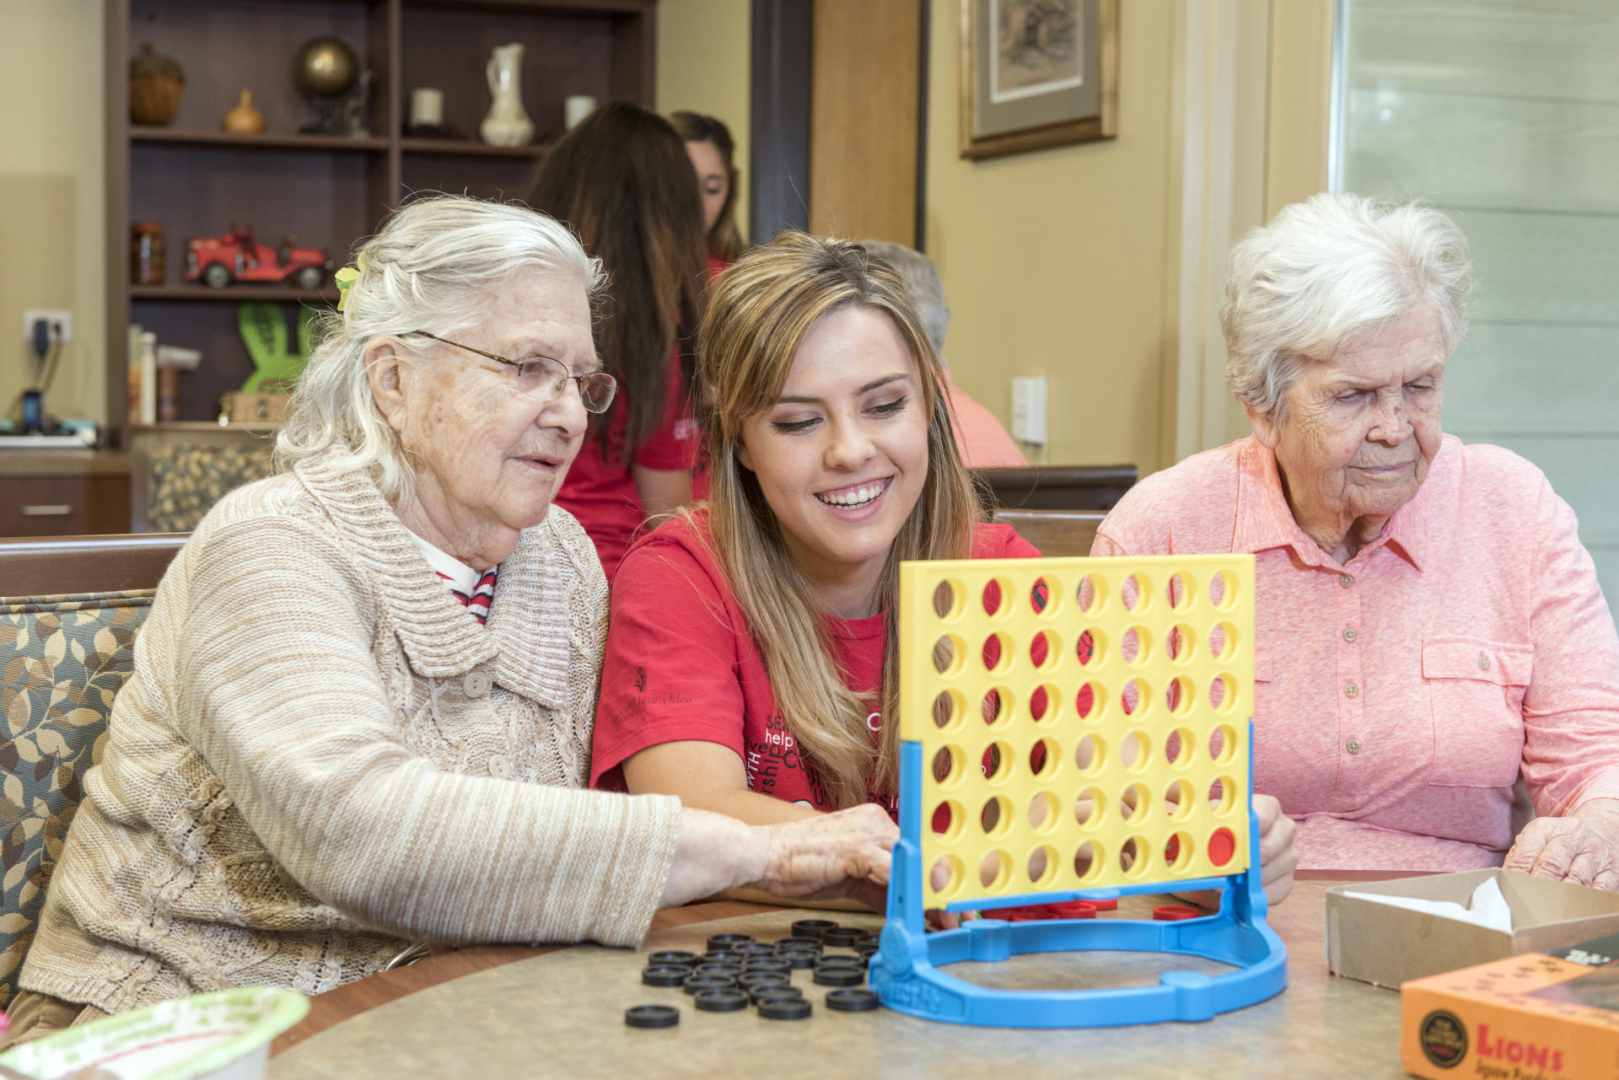 A student plays Connect Four with senior citizens at an assisted living facility.